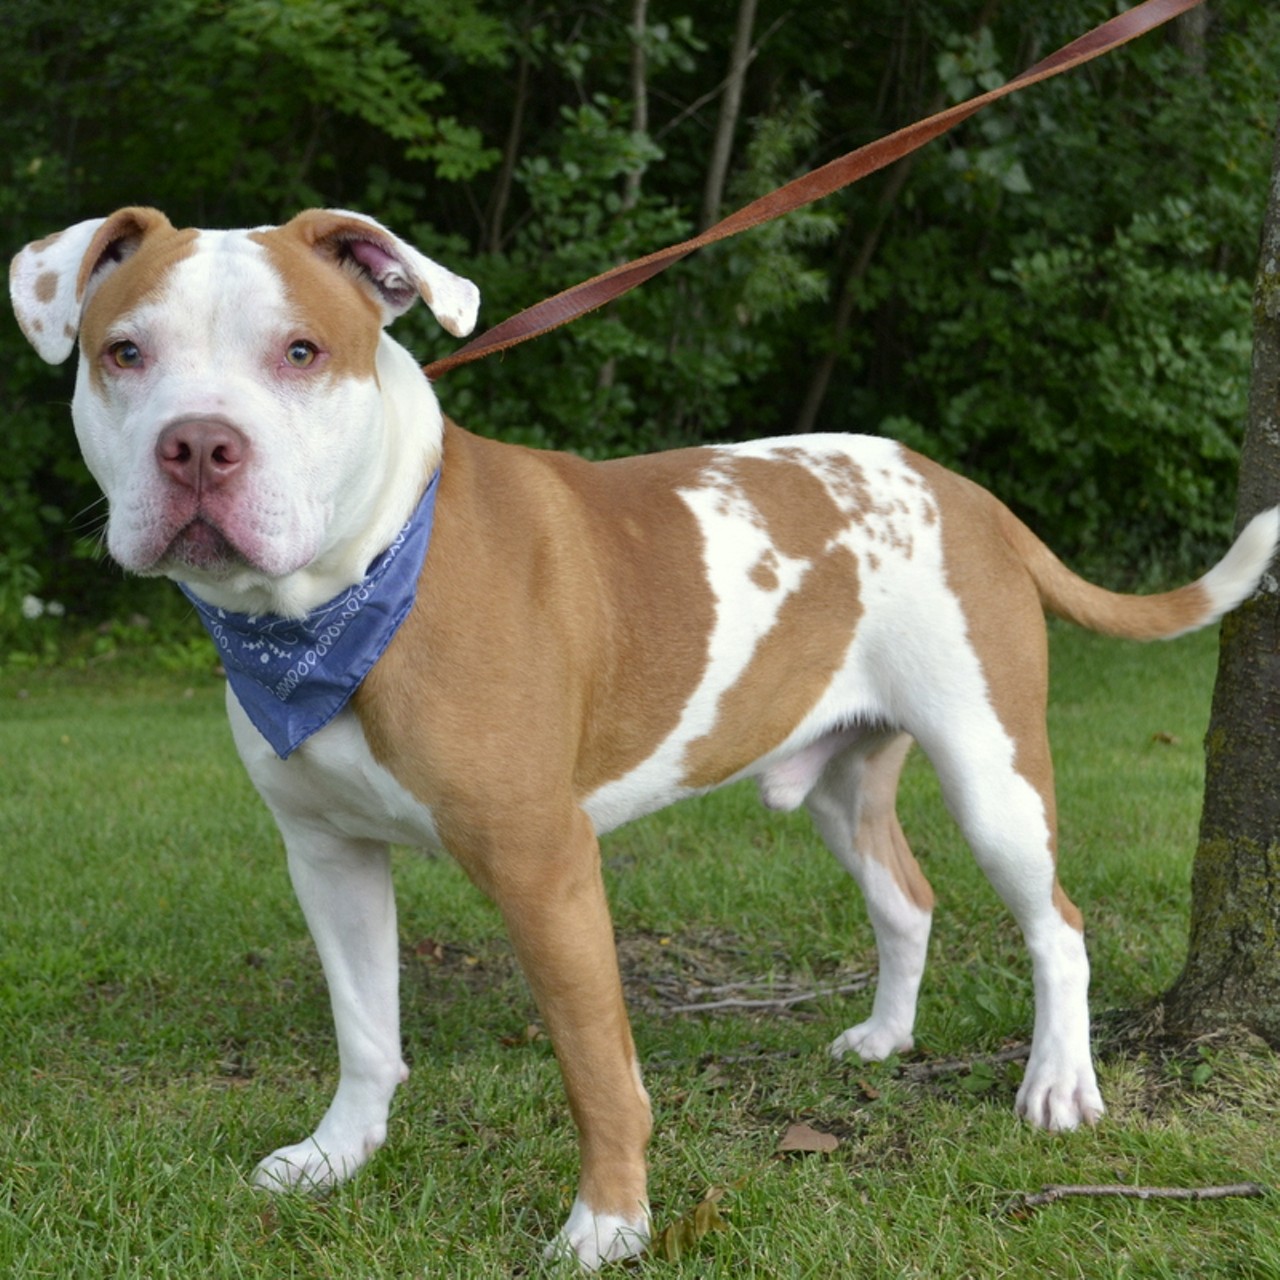 NAME: Jackson 
GENDER:  Male
BREED:  Pit Bull
AGE:  1 year, 7 months
WEIGHT:  53 pounds
SPECIAL CONSIDERATIONS:  None
REASON I CAME TO MHS:  Agency transfer
LOCATION:  Berman Center for Animal Care in Westland
ID NUMBER:  870831